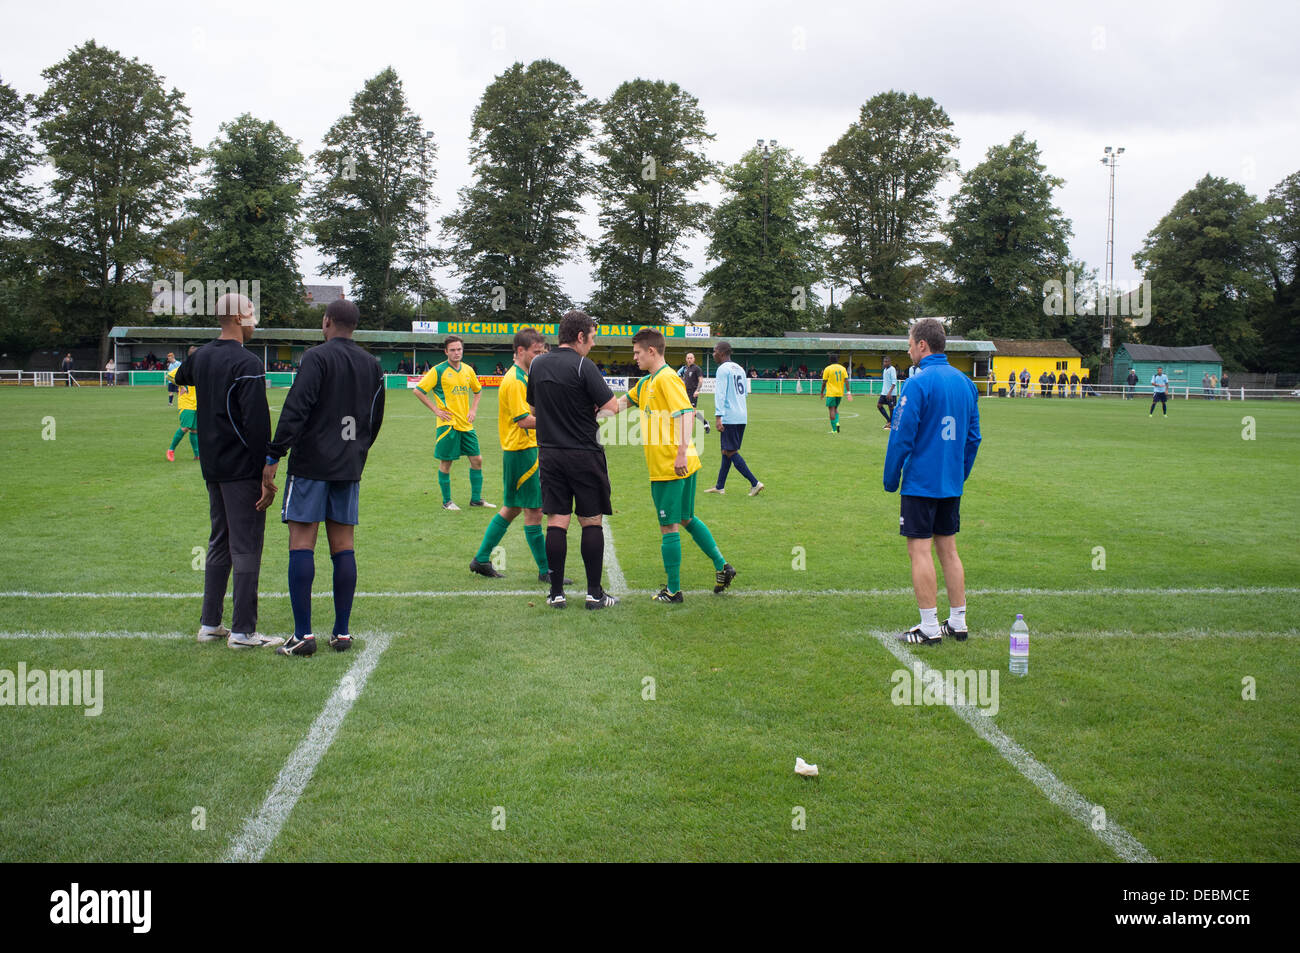 General View taken at Hitchin Town Football Club in North Hertfordshire, UK Stock Photo